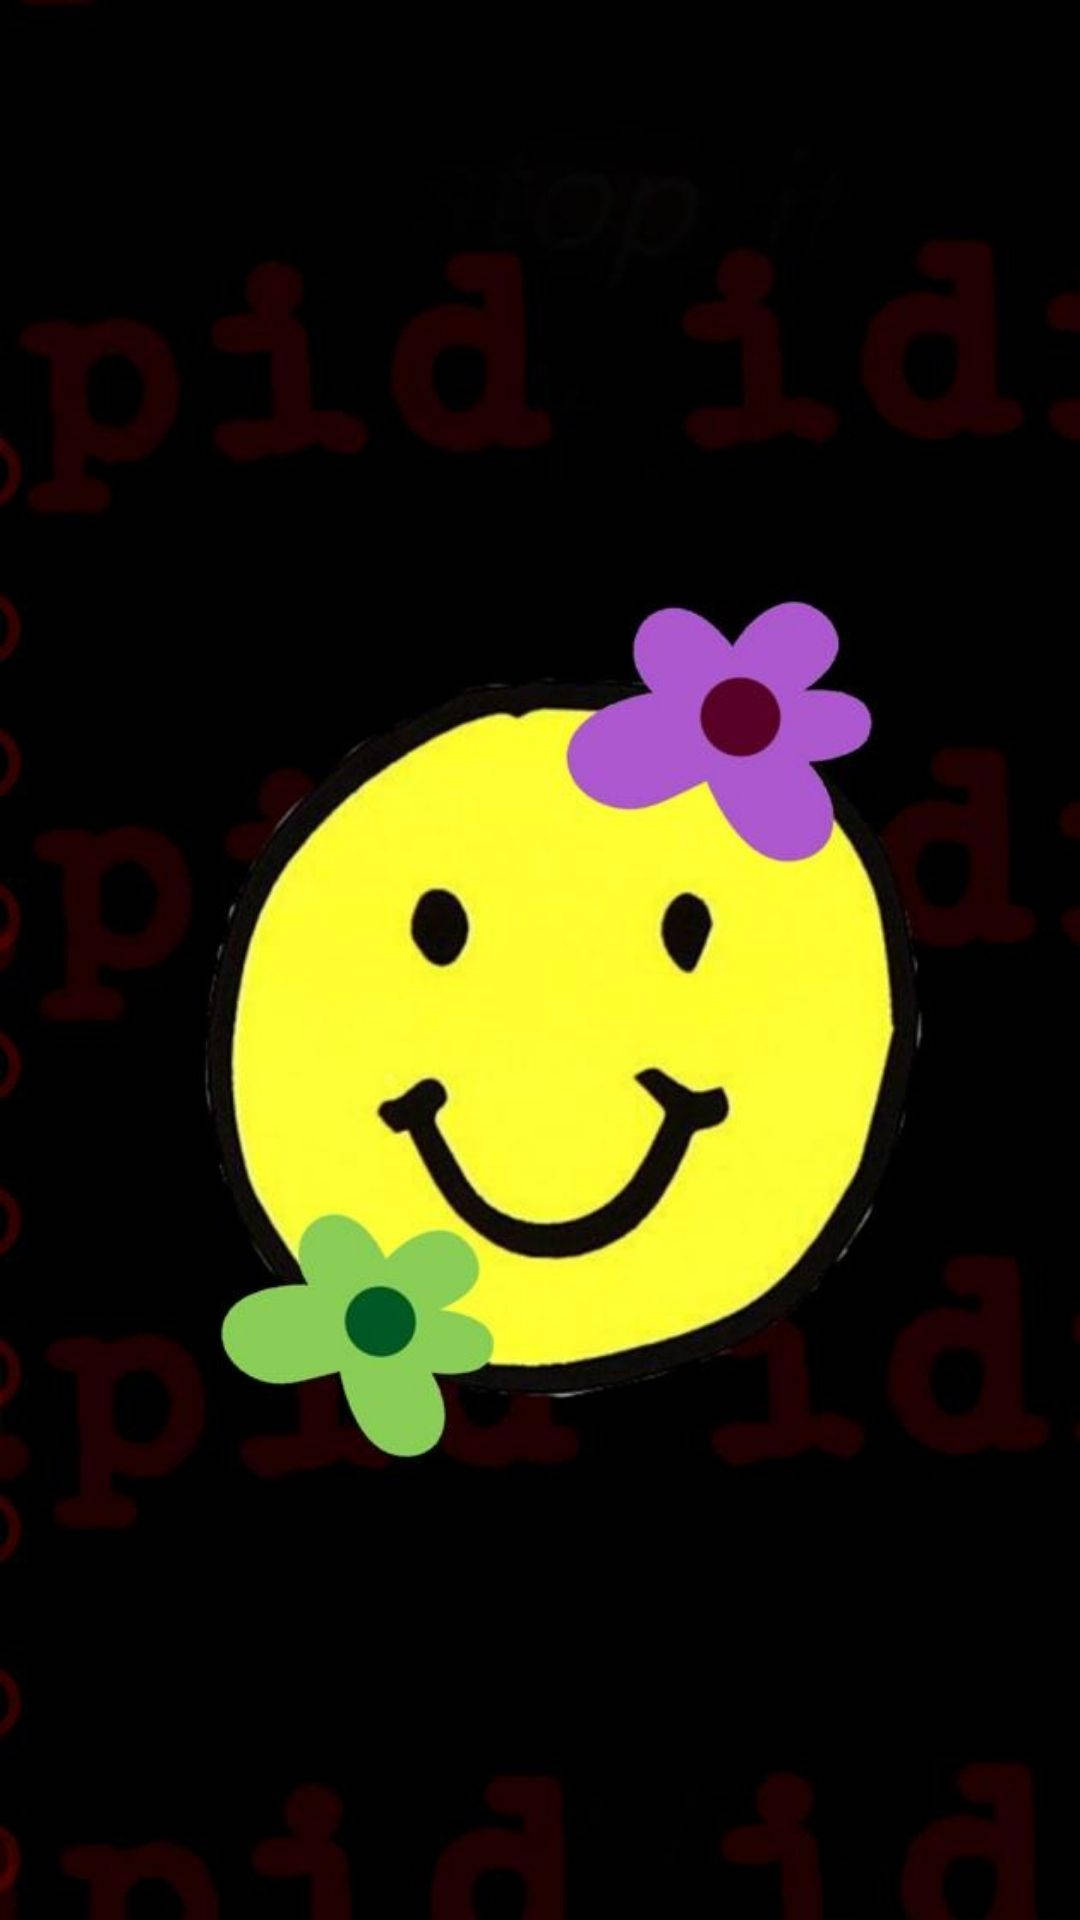 Dreamcore Emoticon With Flowers